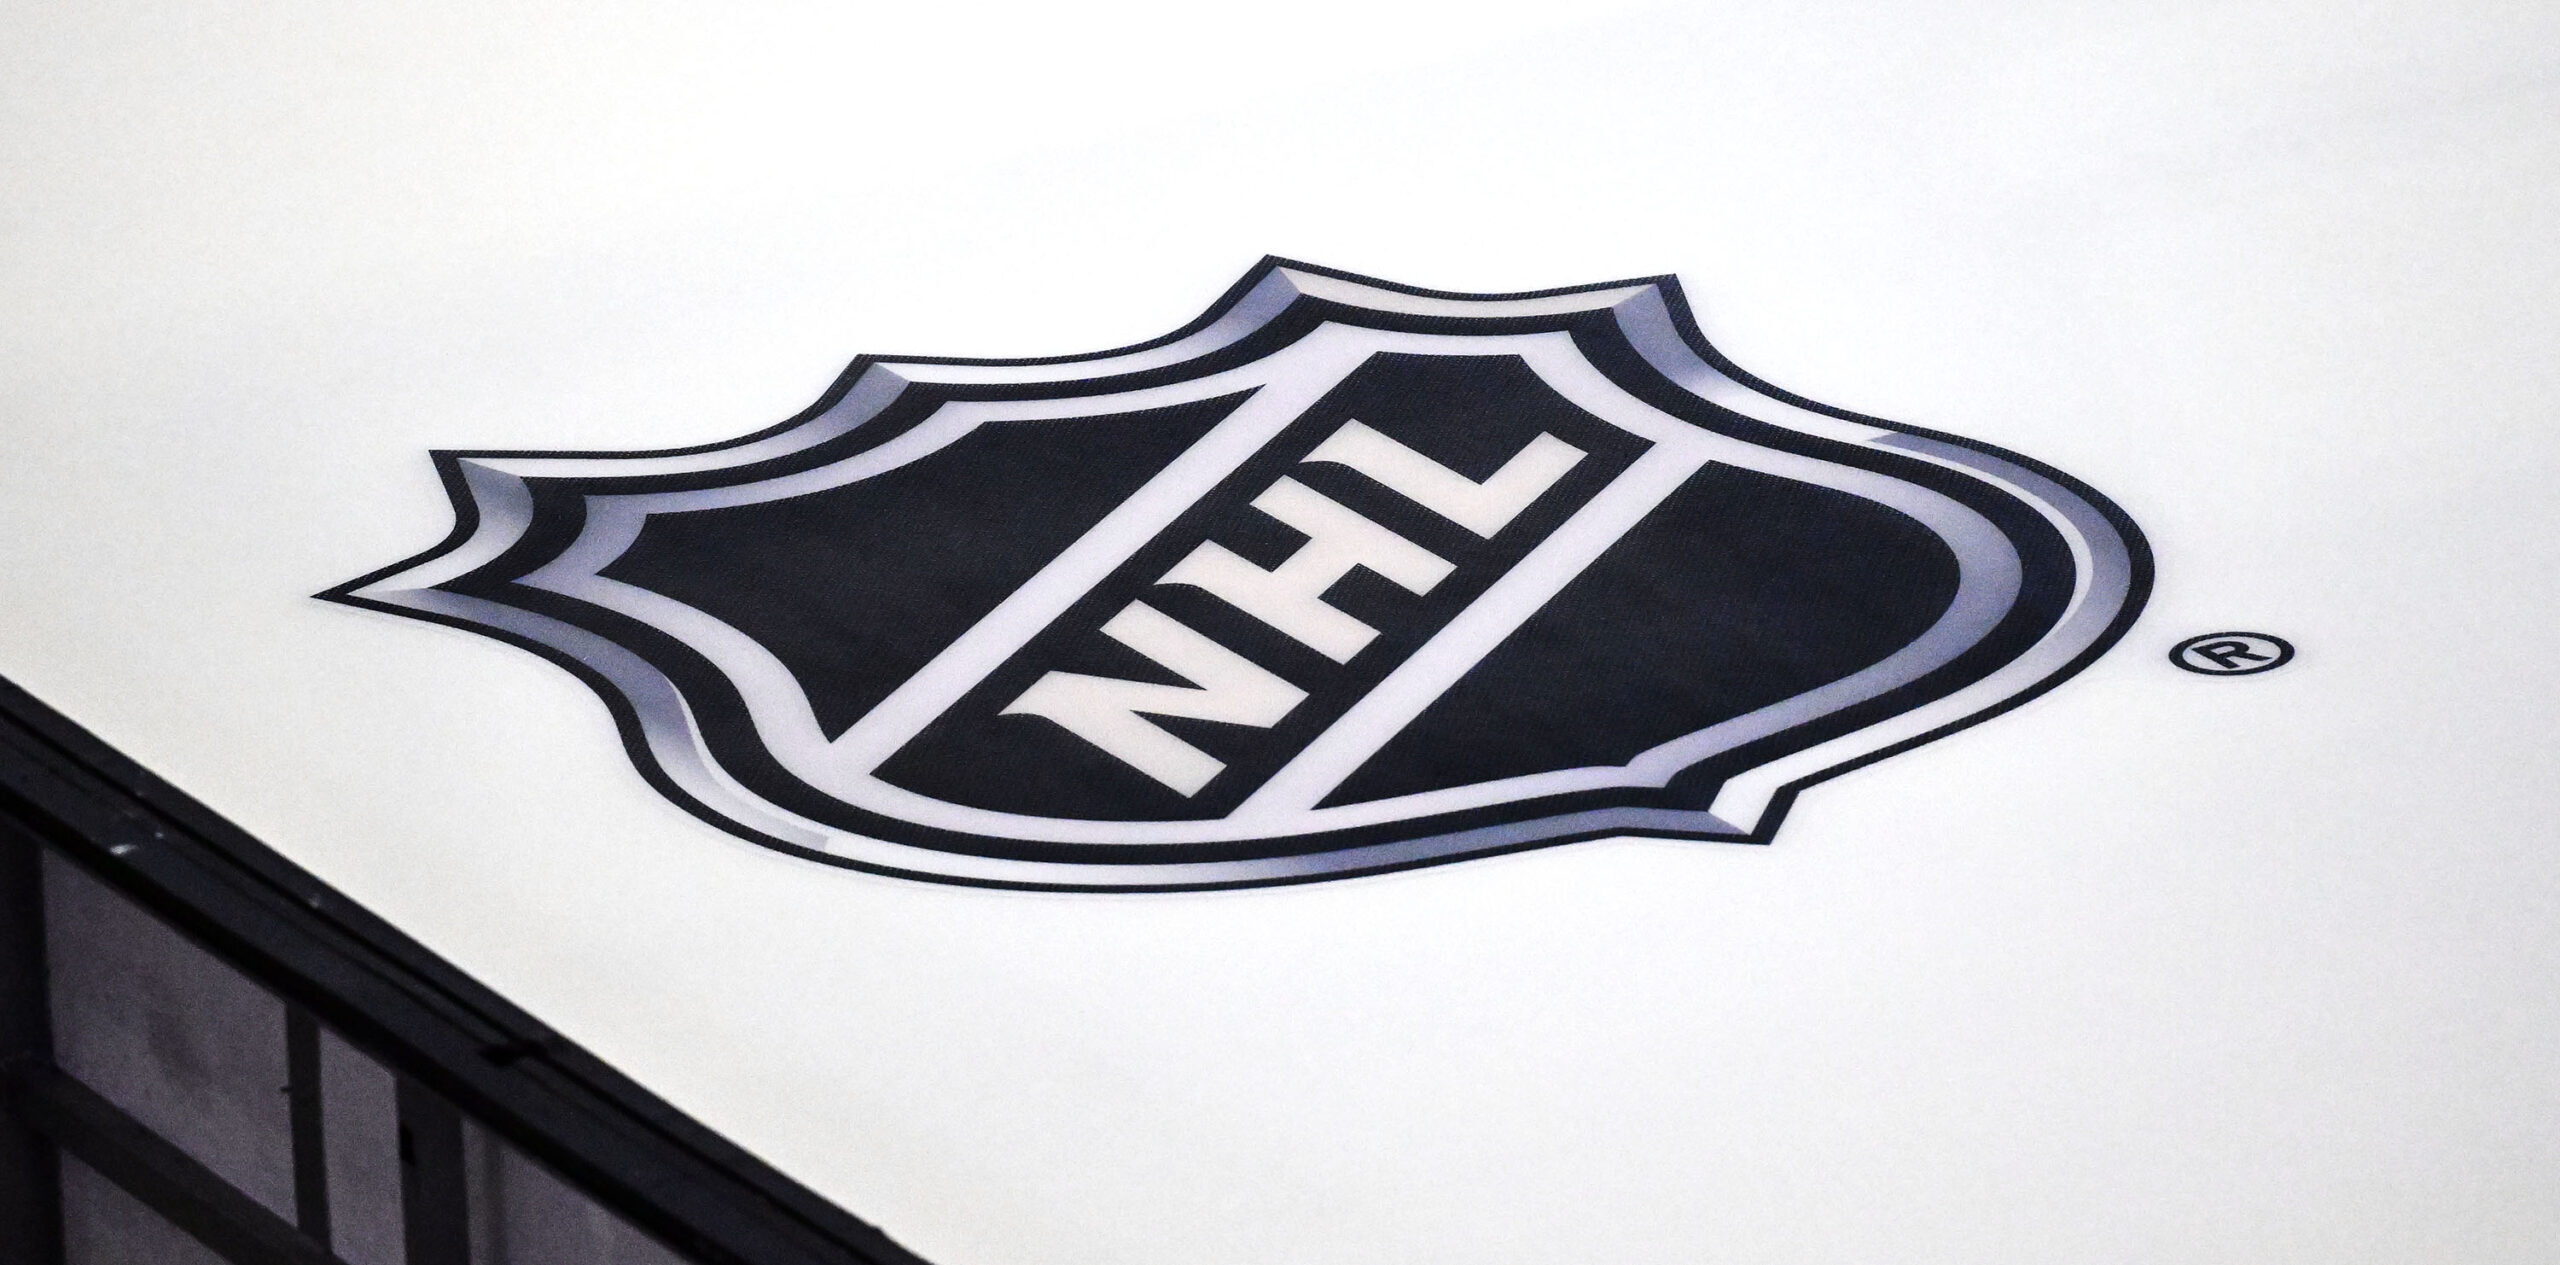 NHL to Generate Economic Growth in Downtown Salt Lake City